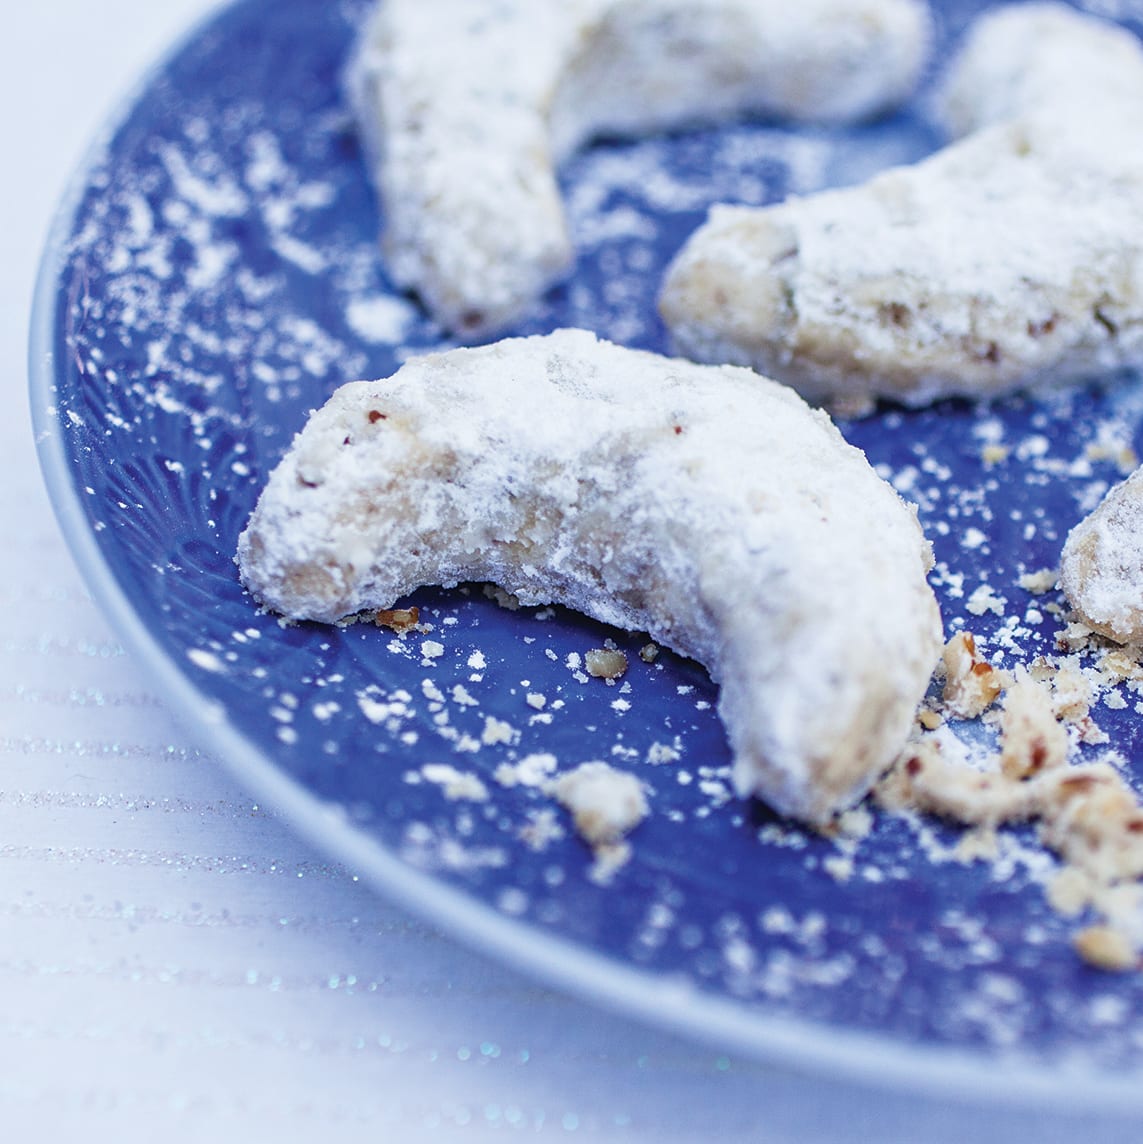 A powdery Christmas confection filled with tasty Southern pecans from Chef Wim Miree of Ollie Irene in Birmingham